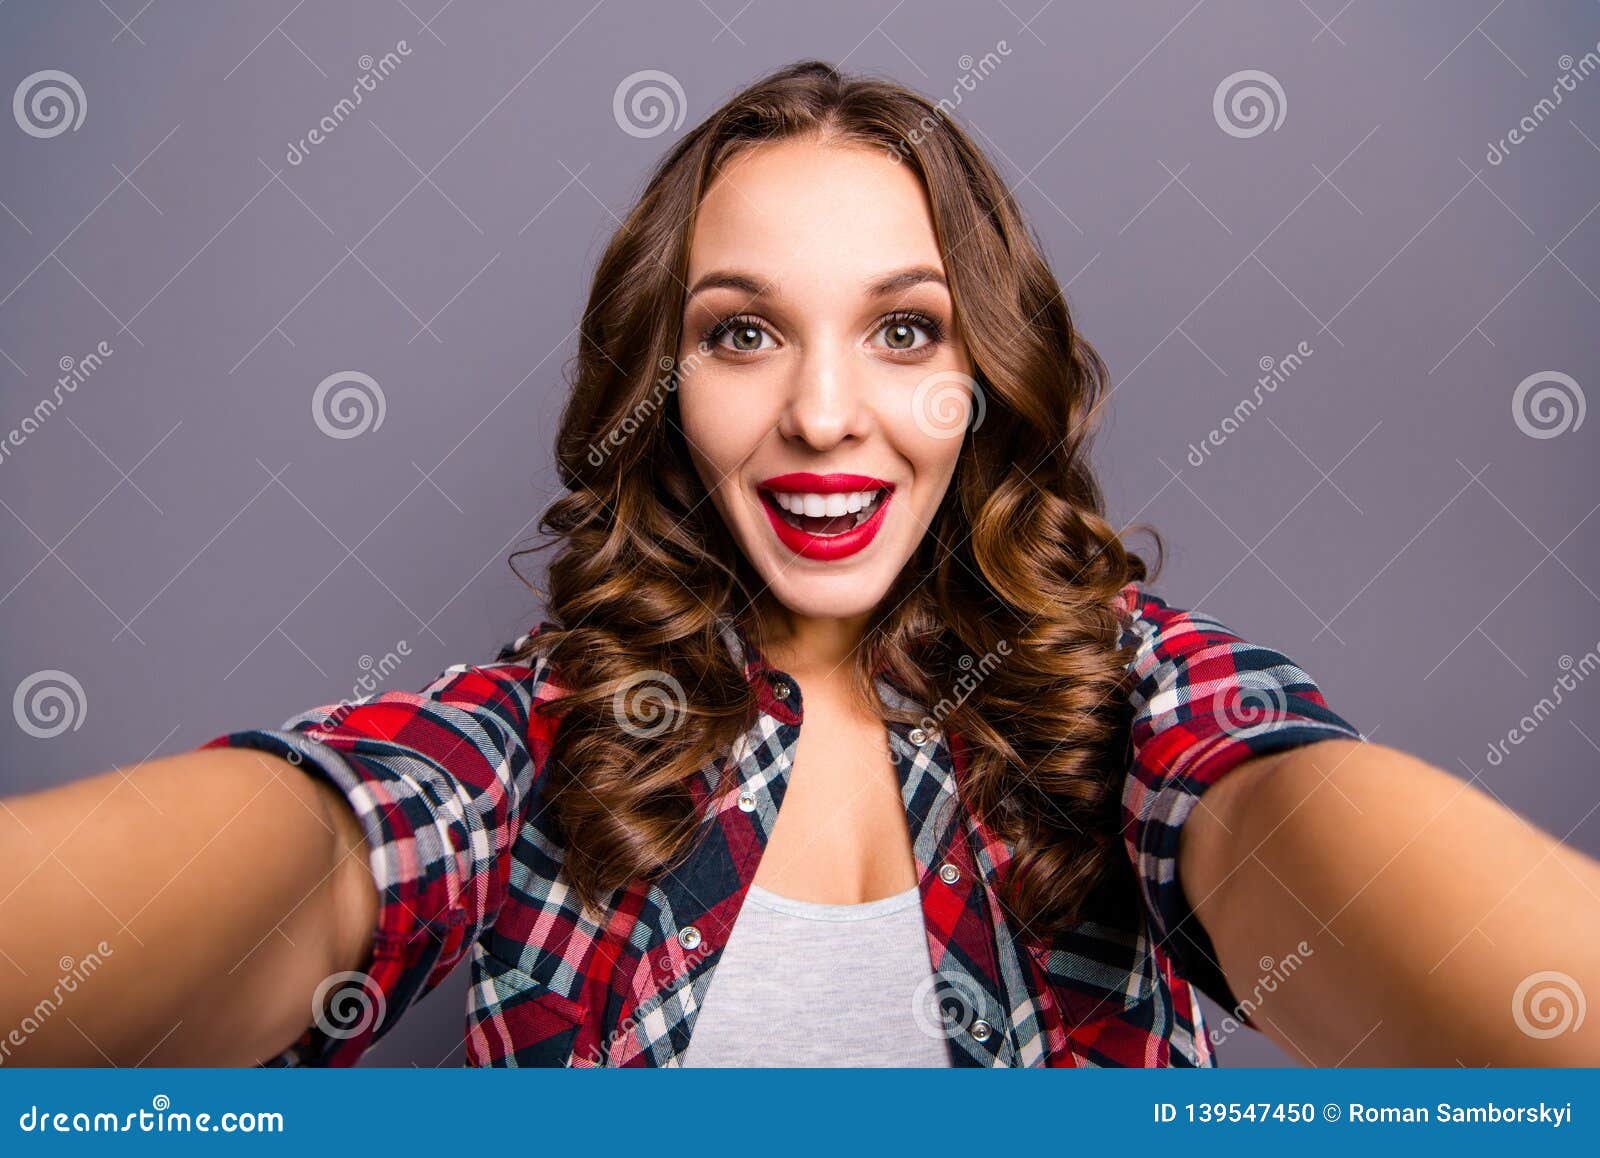 Close Up Portrait Of Amazing Beautiful She Her Lady Laugh Laughter Awesome Hairstyle Toothy